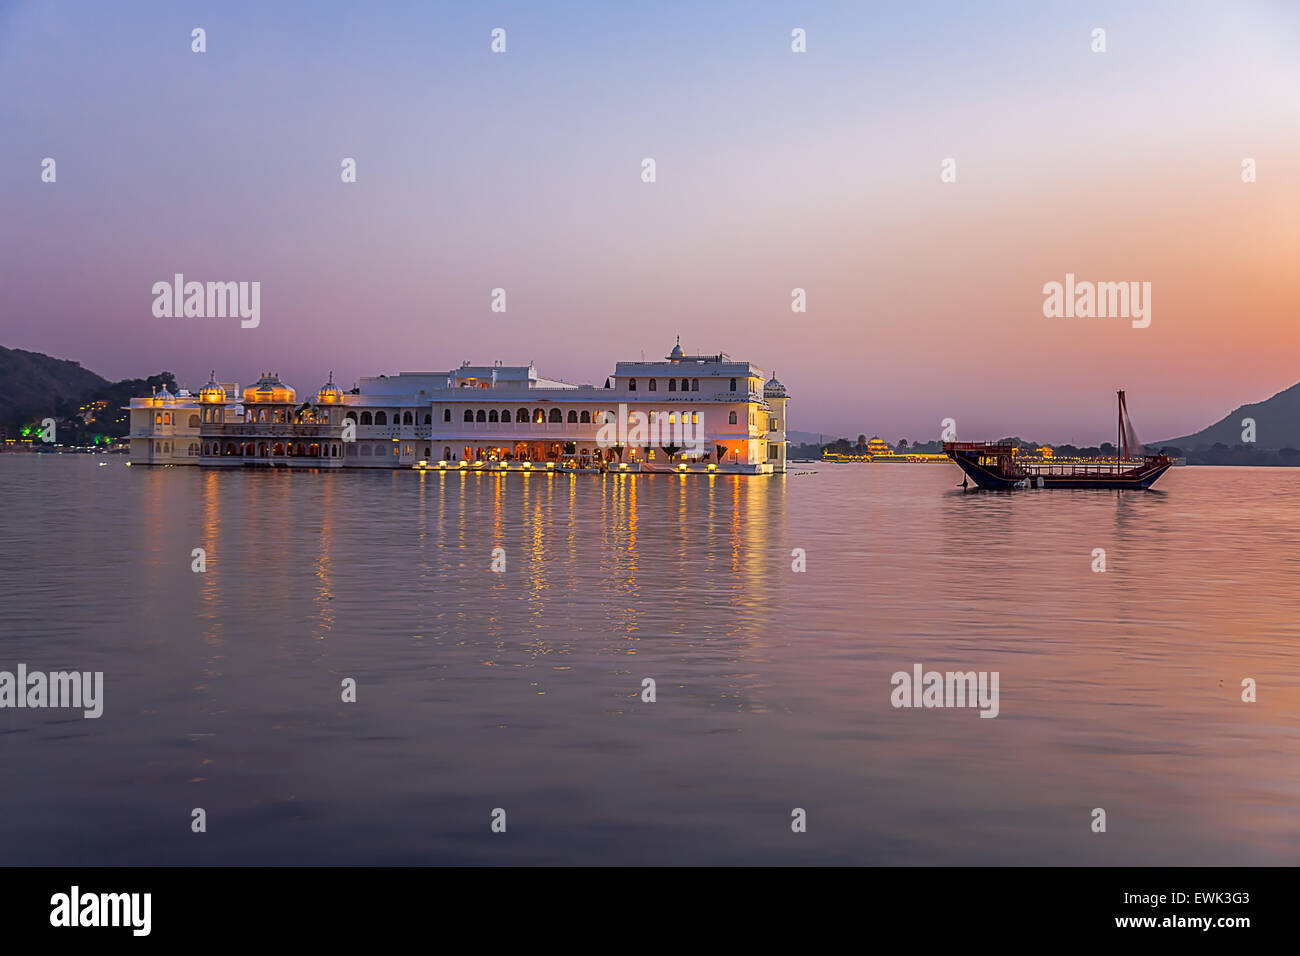 Lake Palace at sunset, the palace is located in lake pichola in Udaipur, Rajasthan, India Stock Photo